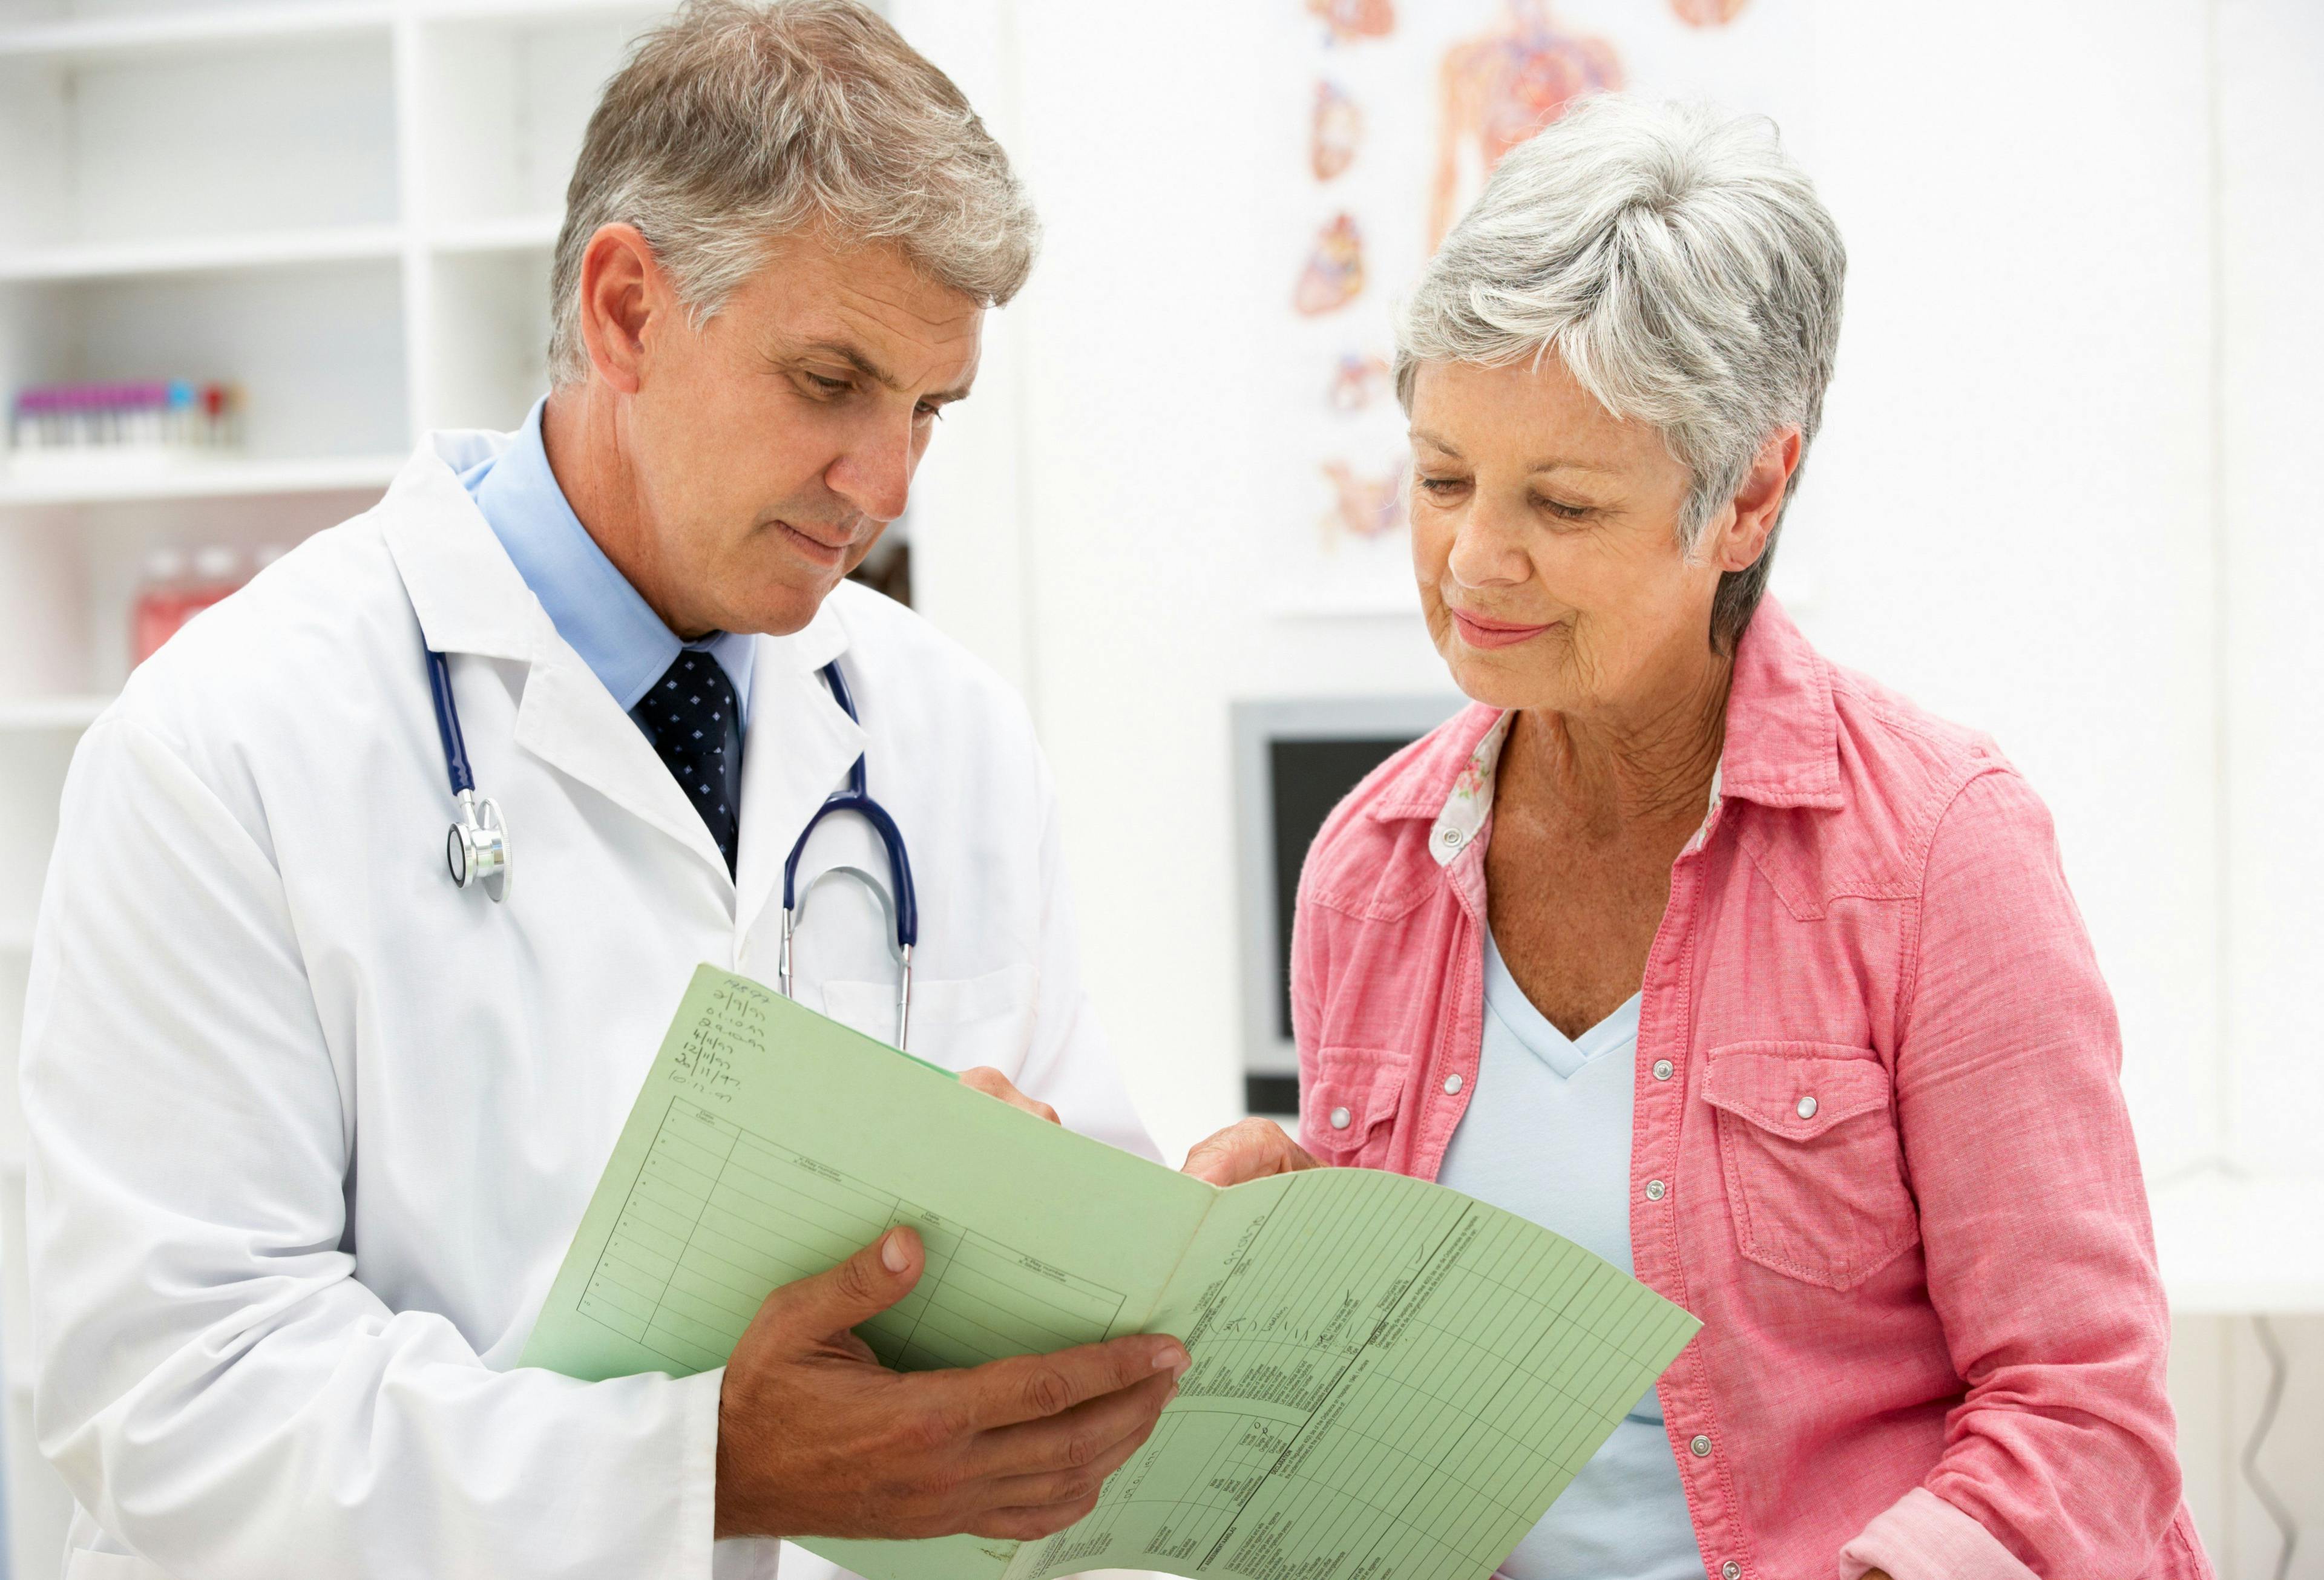 Doctor talking to patient | Credit: Fotolia